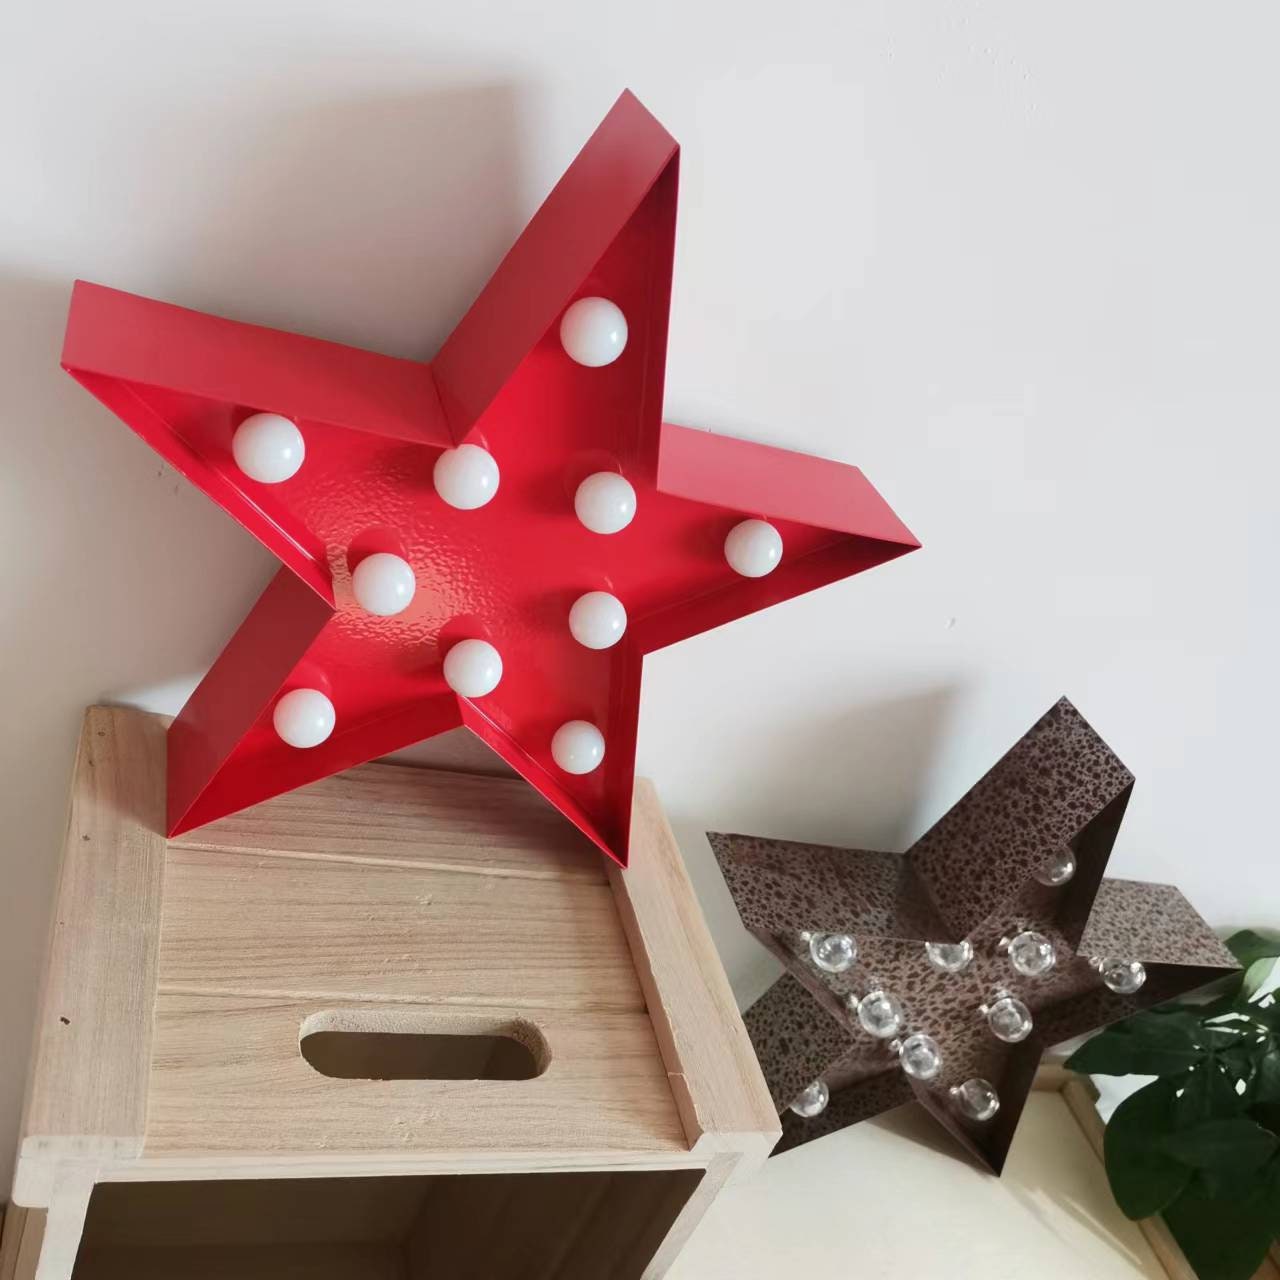 Novelty Light - Sign Etsy up Battery Night Light Marquee Vintage LED Powered Room Light Christmas Star Star Marquee Decor Gift Red